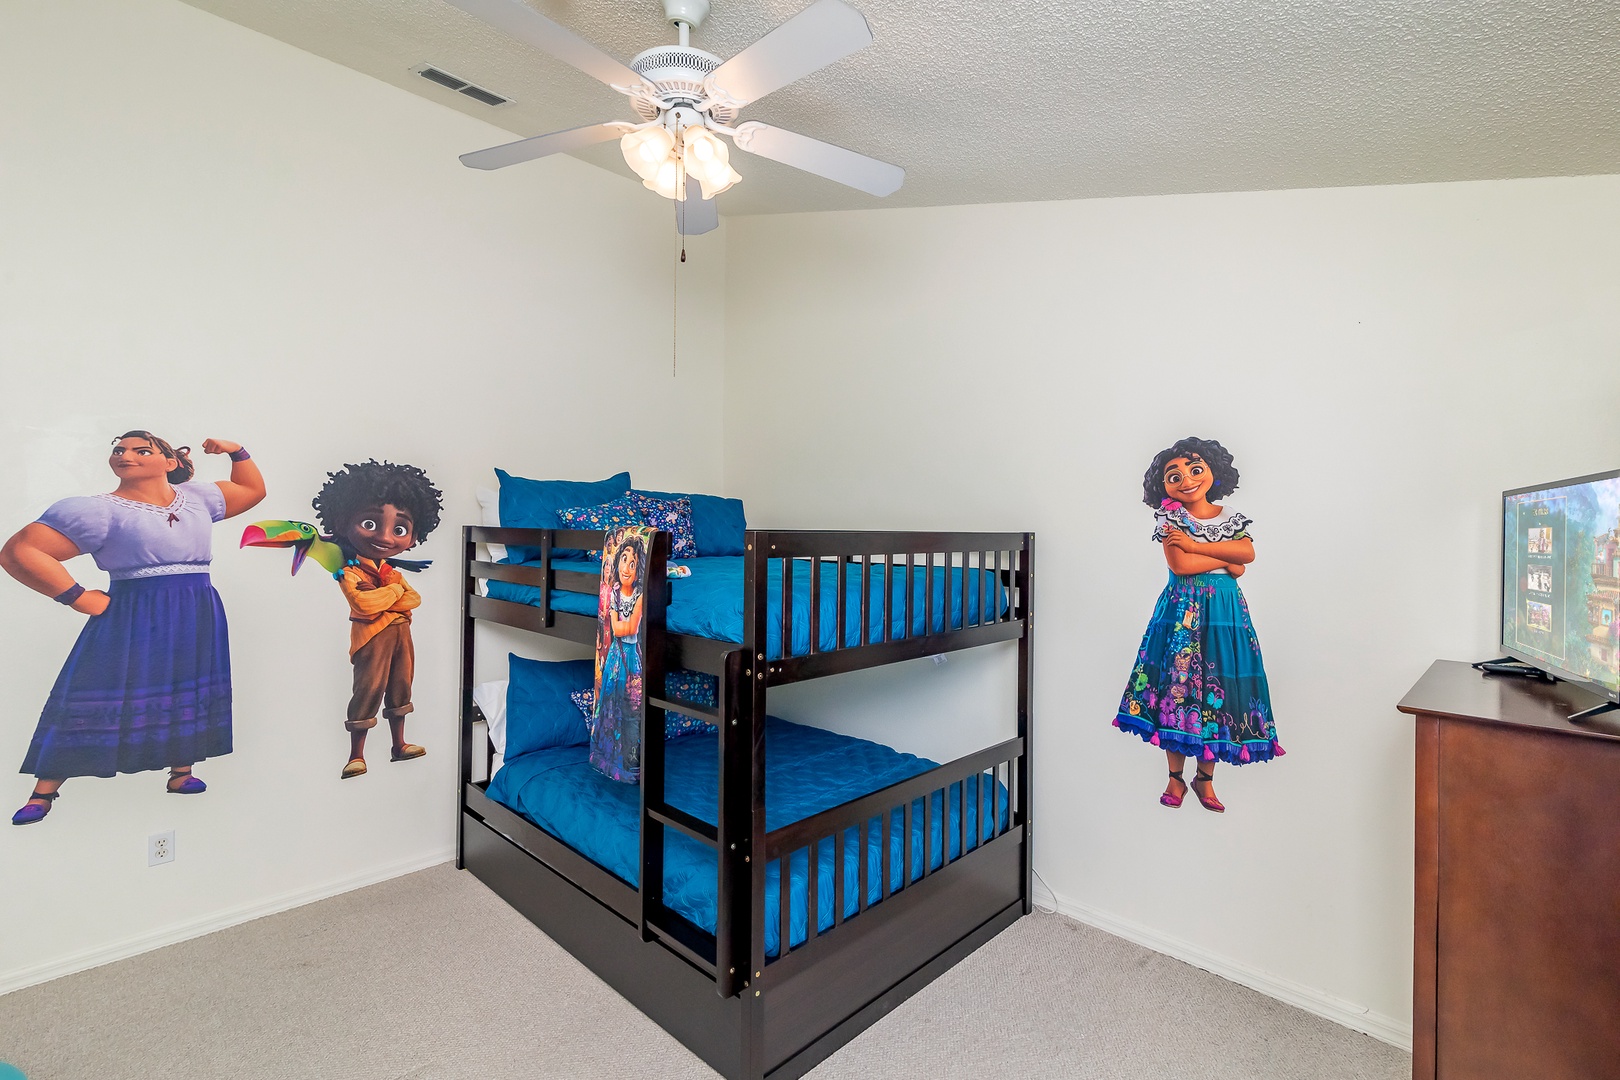 2631 Autumn Creek Cir, KBedroom #2 with Full over Full Bunk Beds with Twin Trundleissimmee FL 34747 US - Final  (32)